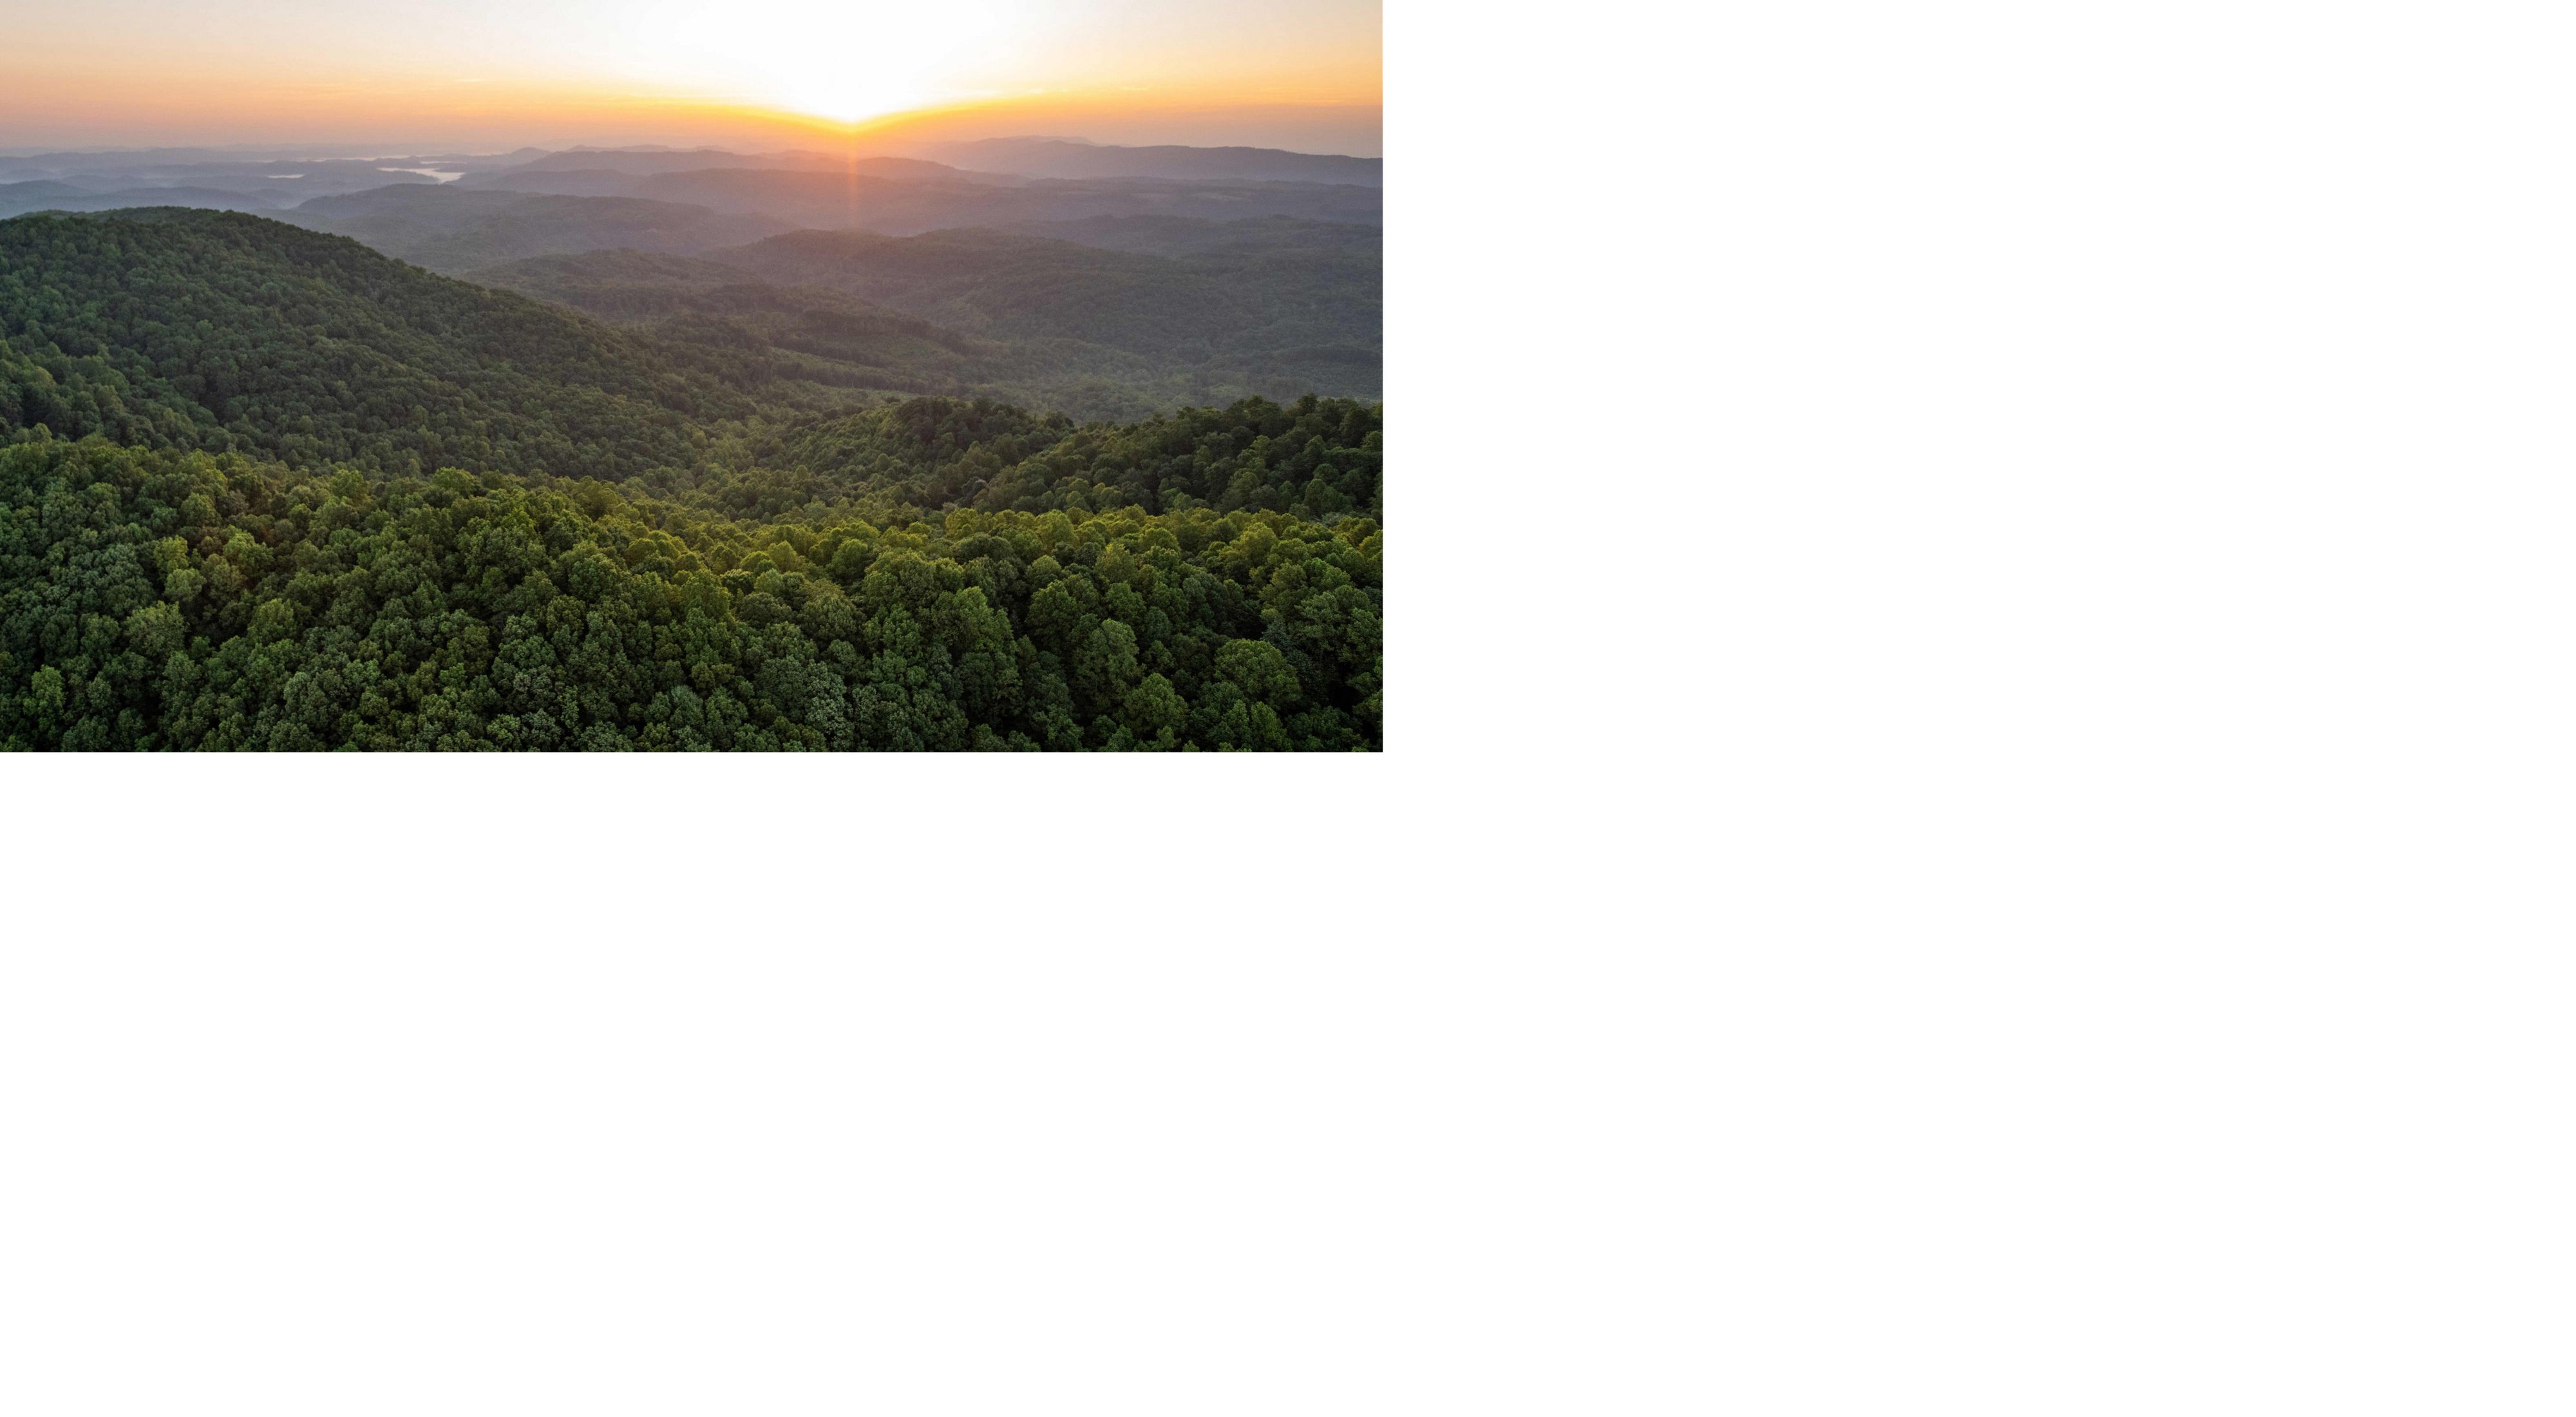 Sunrise aerial image taken near the border of Tennessee and Kentucky of land protected by The Nature Conservancy's Cumberland Forest Project. May 2019. The Cumberland Forest Project protects 253,000 acres of Appalachian forest and is one of TNC’s largest-ever conservation efforts in the eastern United States.